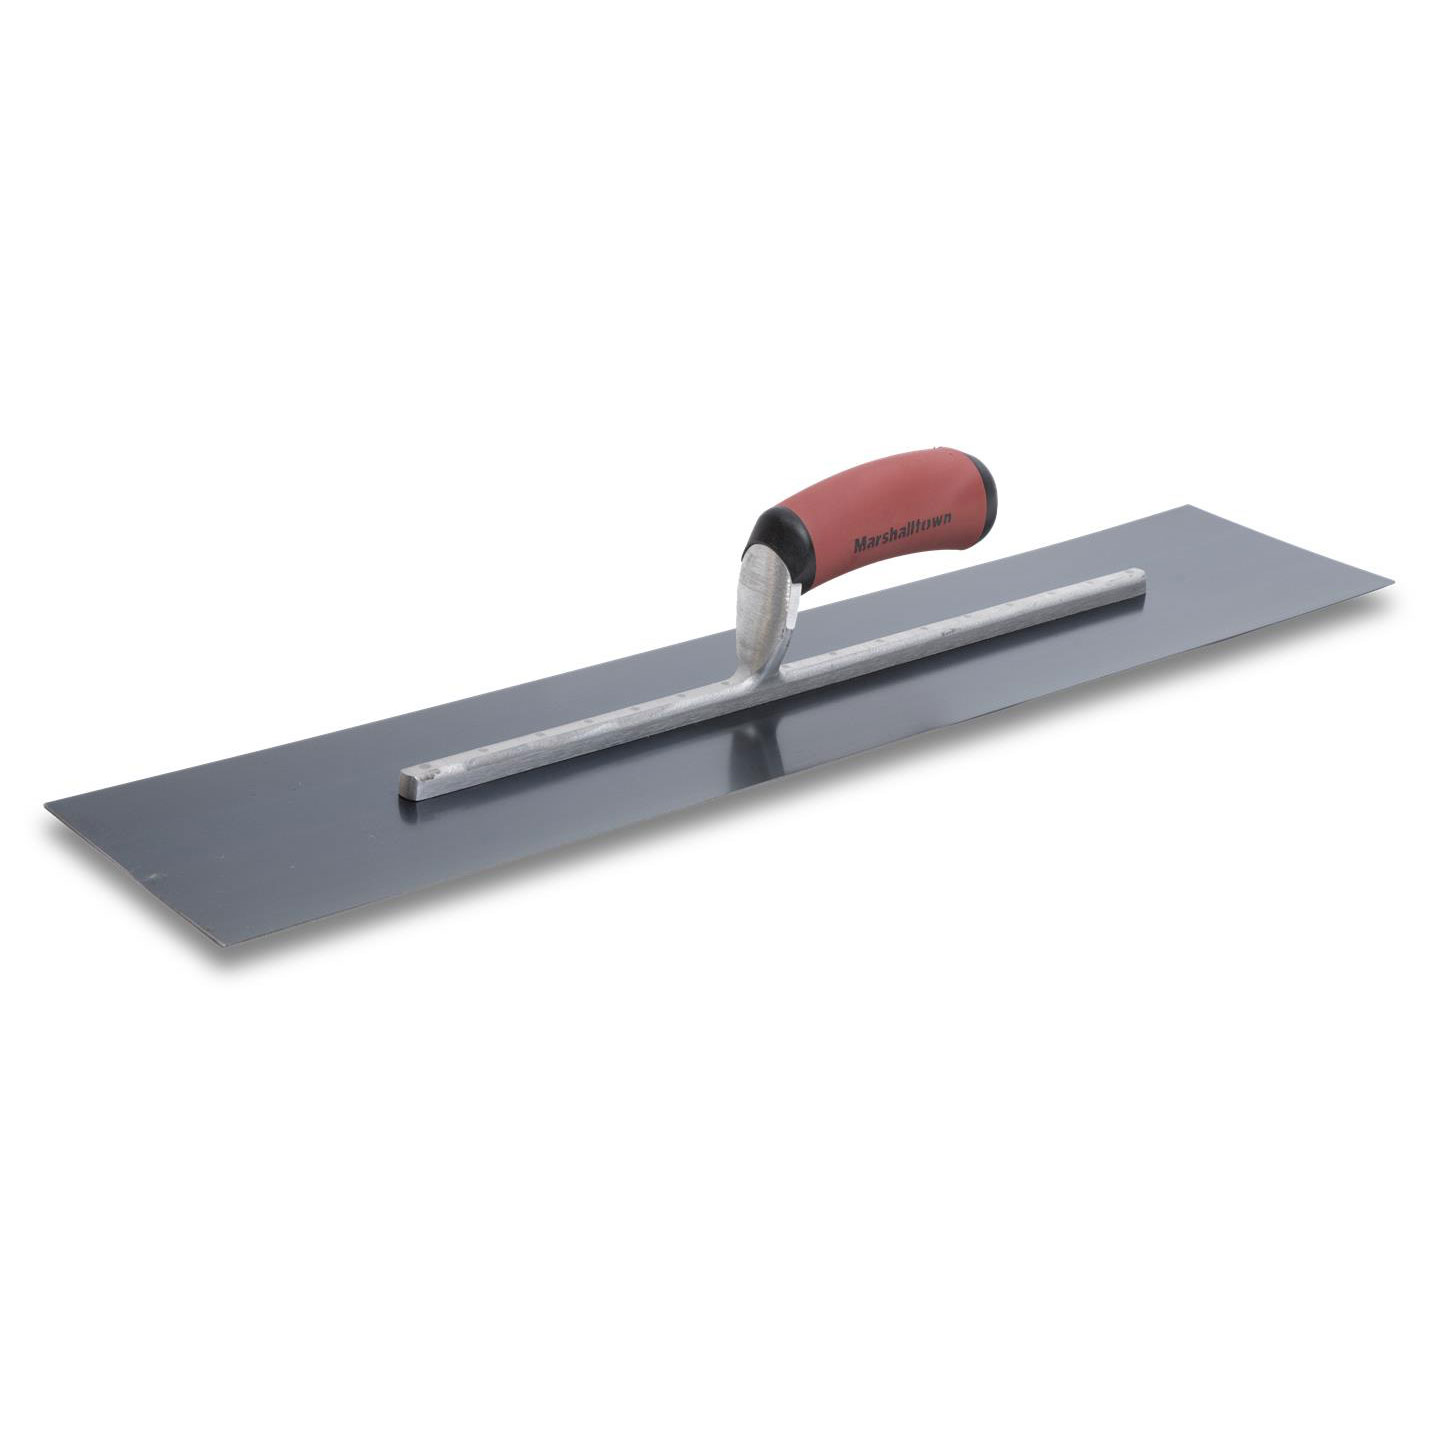 Marshalltown MXS244BD 24in x 4in Blue Steel Finishing Trowel with Curved DuraSoft Handle MXS244BD